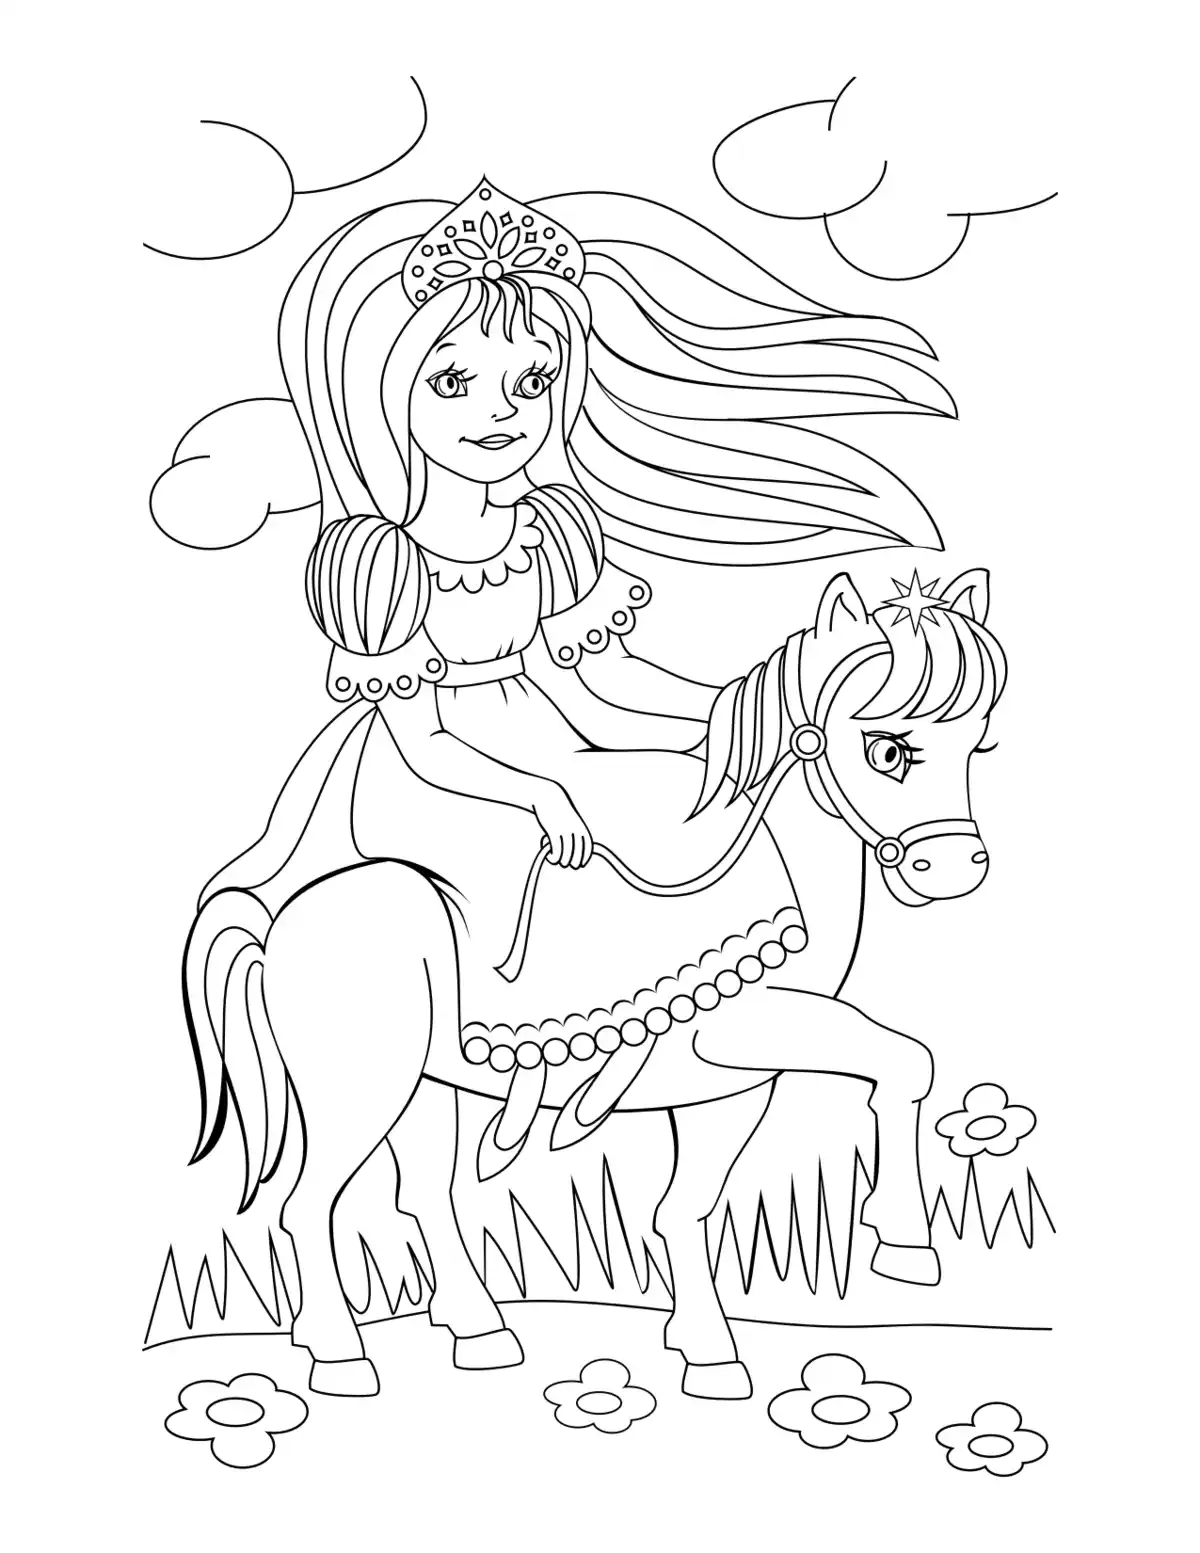 Free Download Coloring PDF, Princess Riding Horse Flowers Coloring Pages Pdf